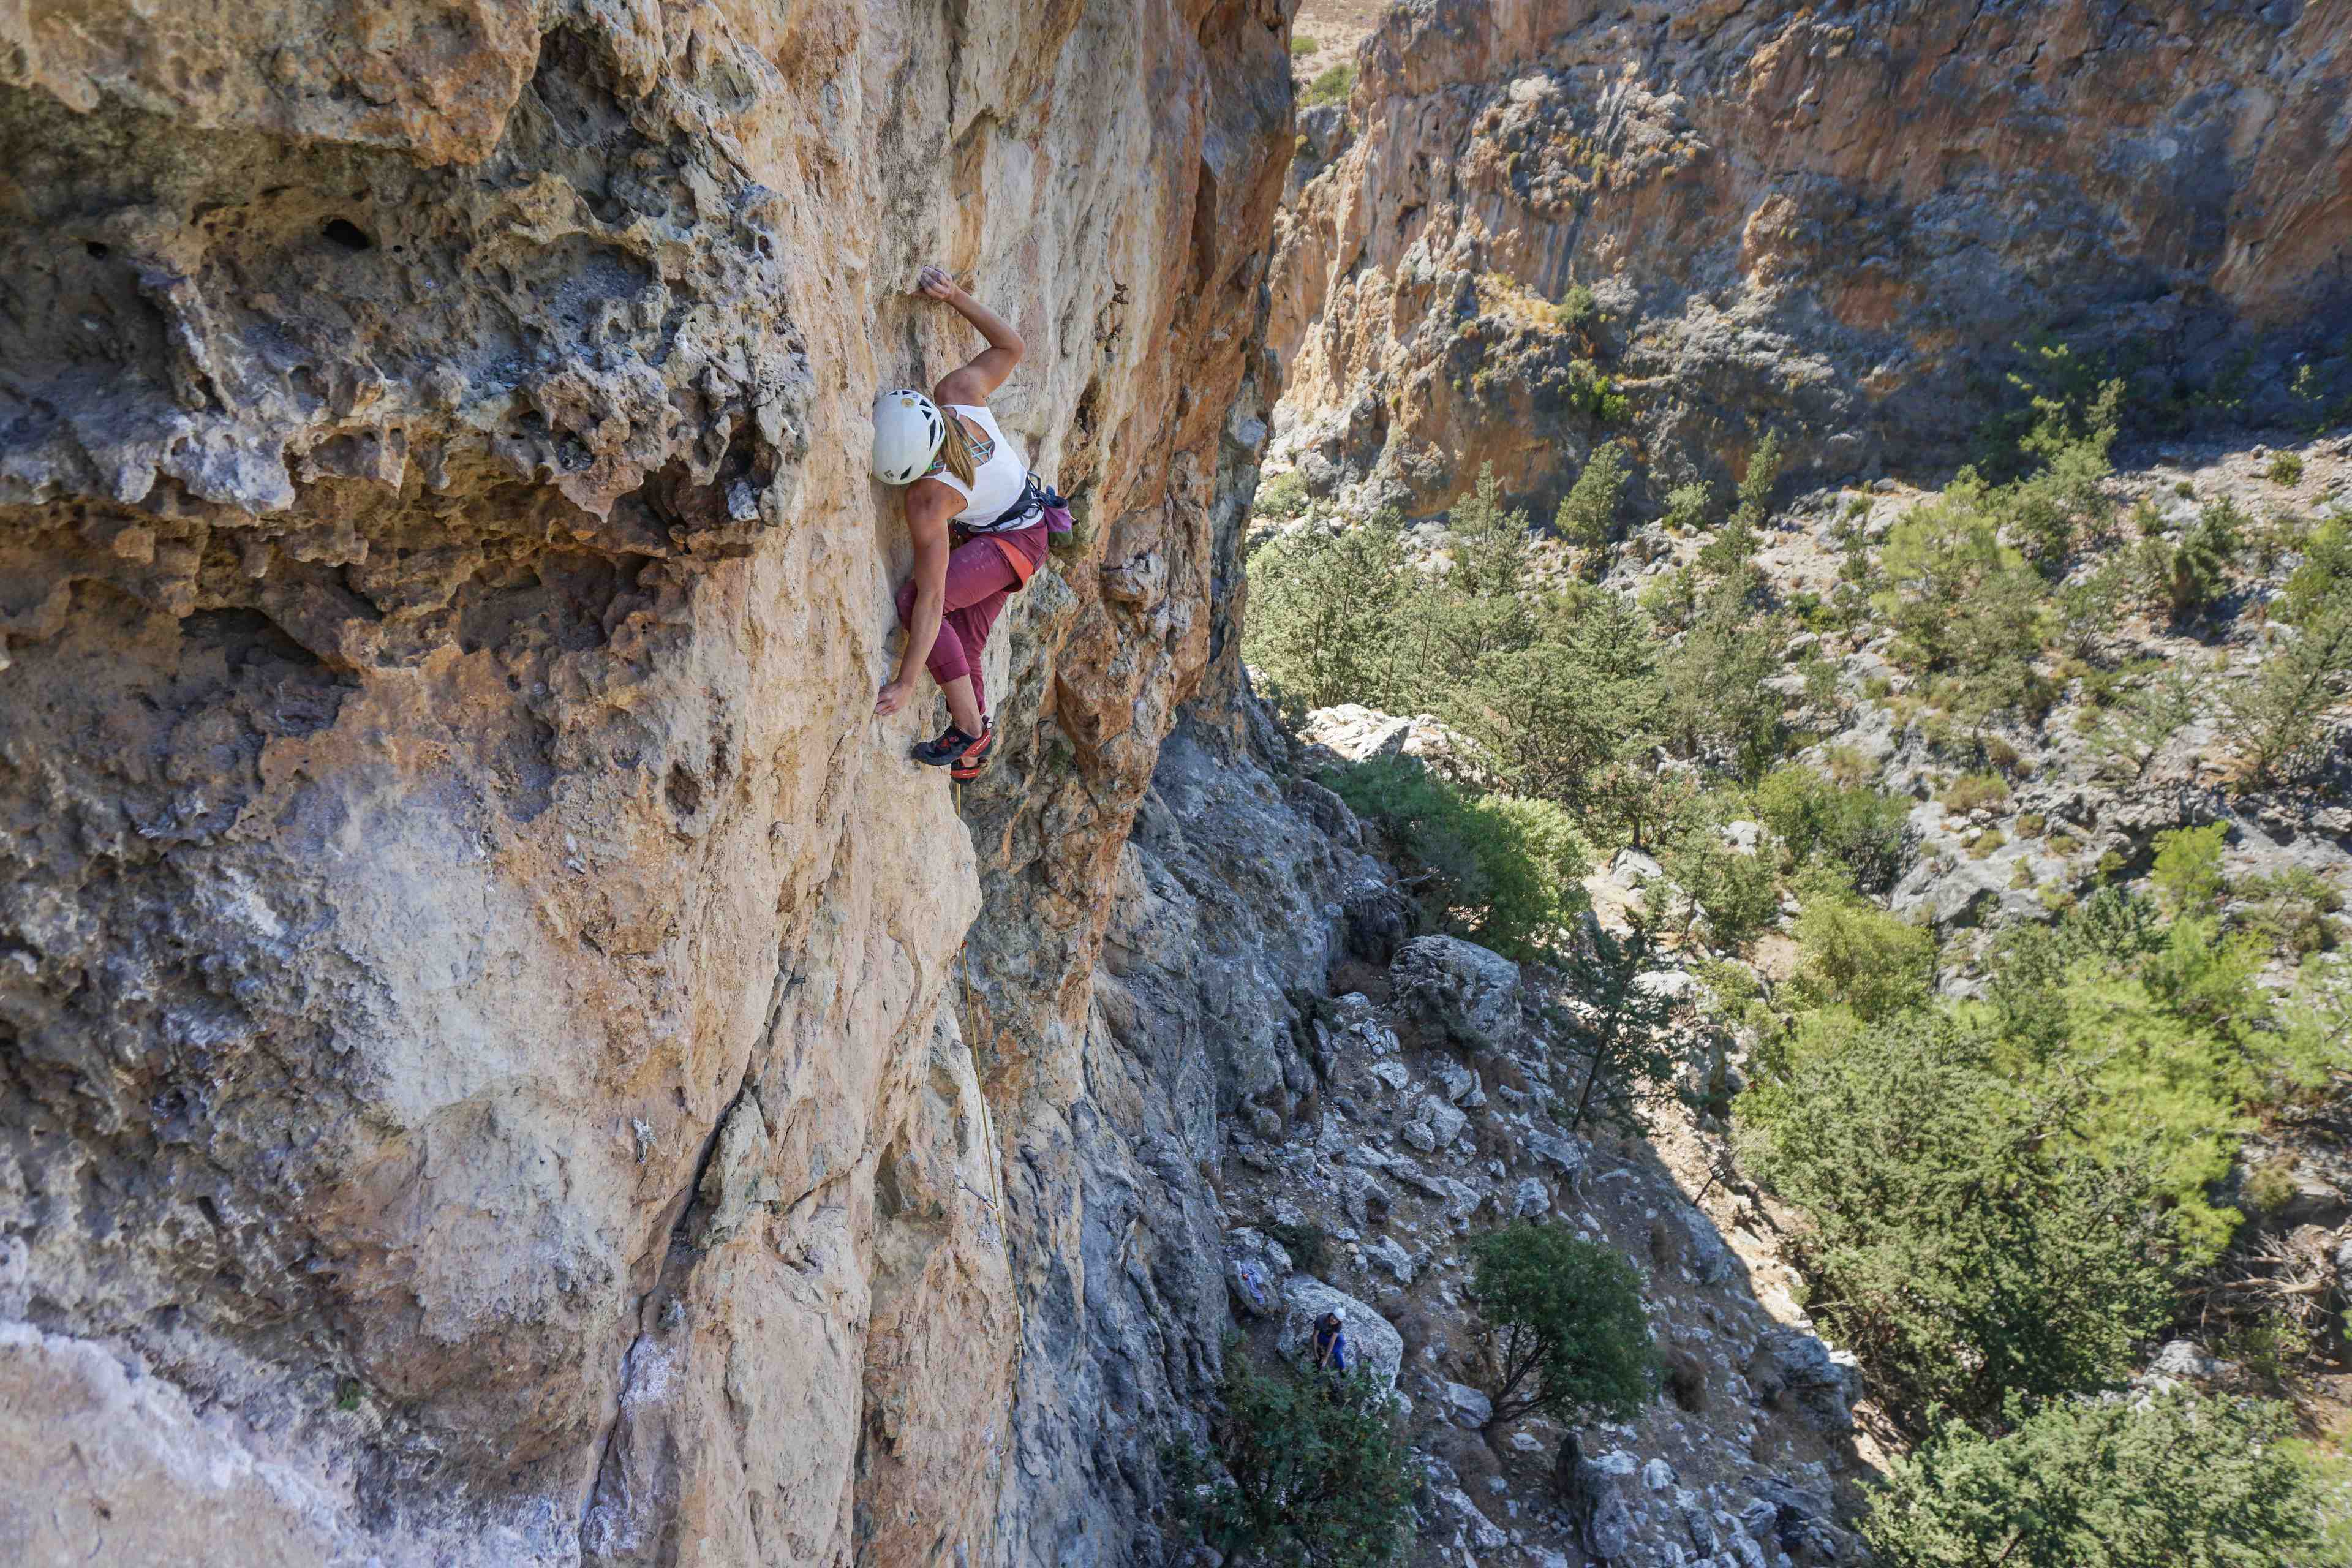 Rock Climbing between Southern Europe and Middle East: A Guide to Cyprus’ climbing opportunities